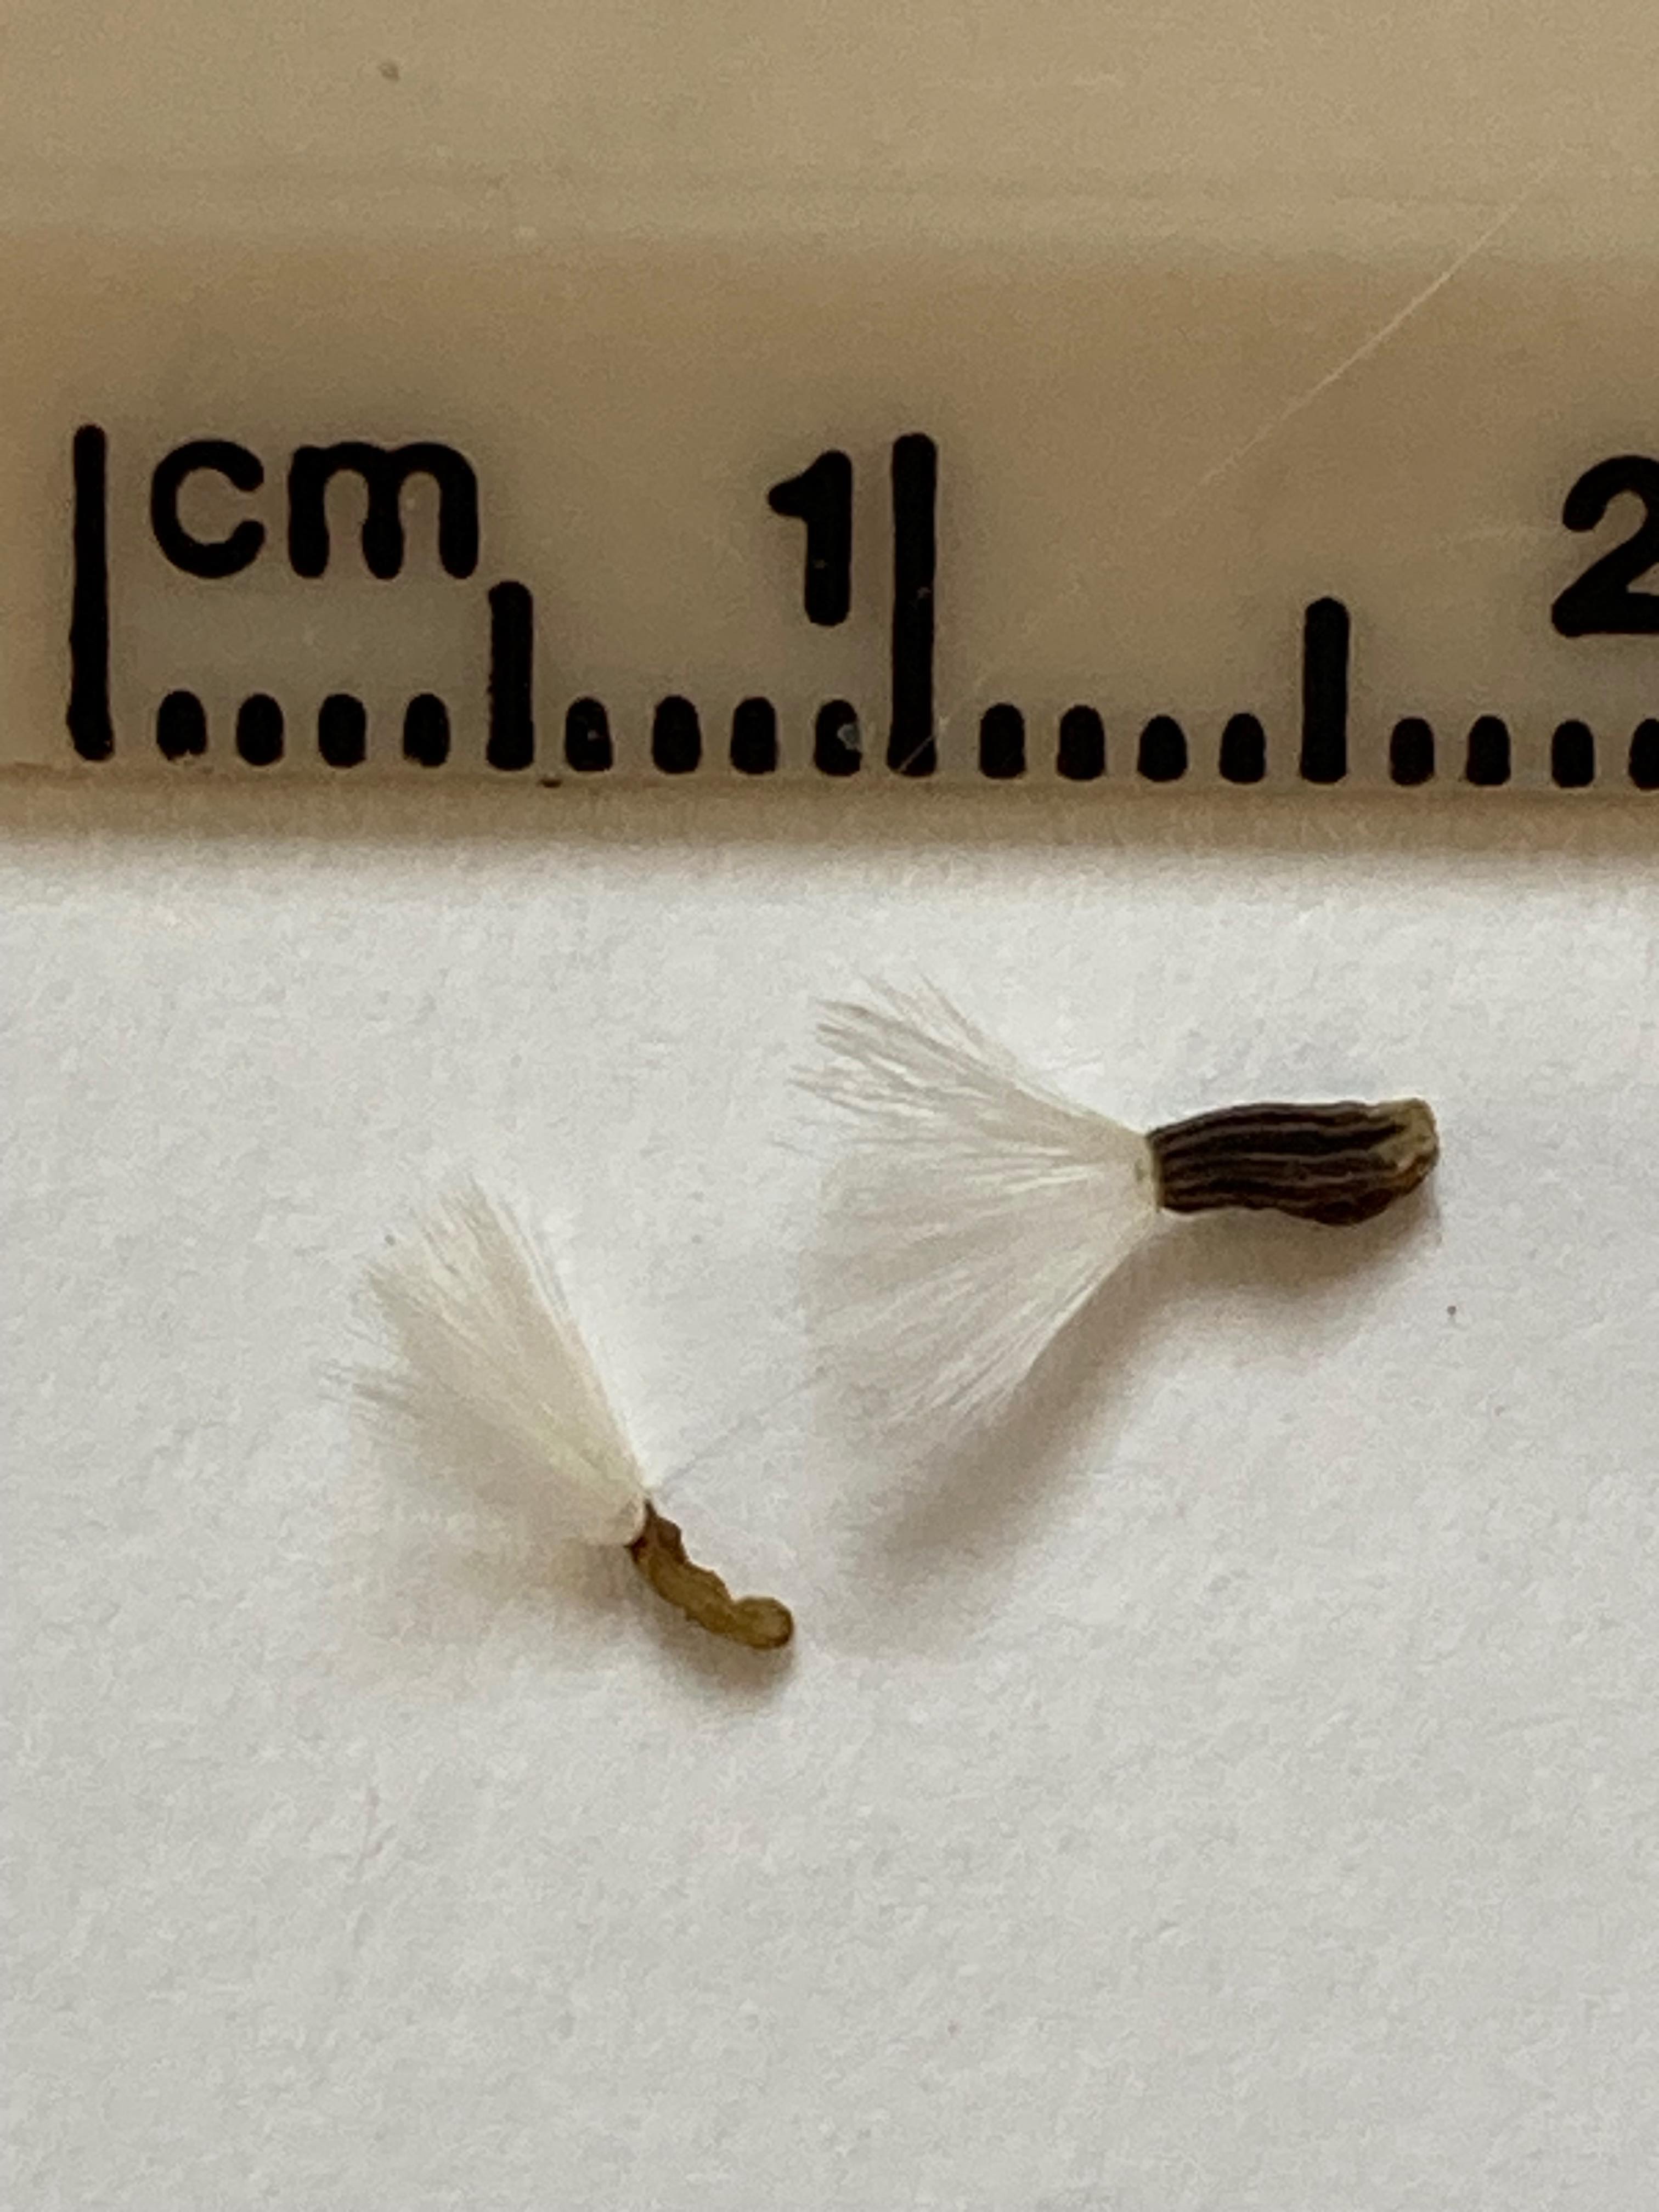 The Scientific Name is Arnoglossum atriplicifolium [= Cacalia atriplicifolia]. You will likely hear them called Pale Indian-plantain. This picture shows the Harvested mature seeds, the one on the left probably not viable. of Arnoglossum atriplicifolium [= Cacalia atriplicifolia]